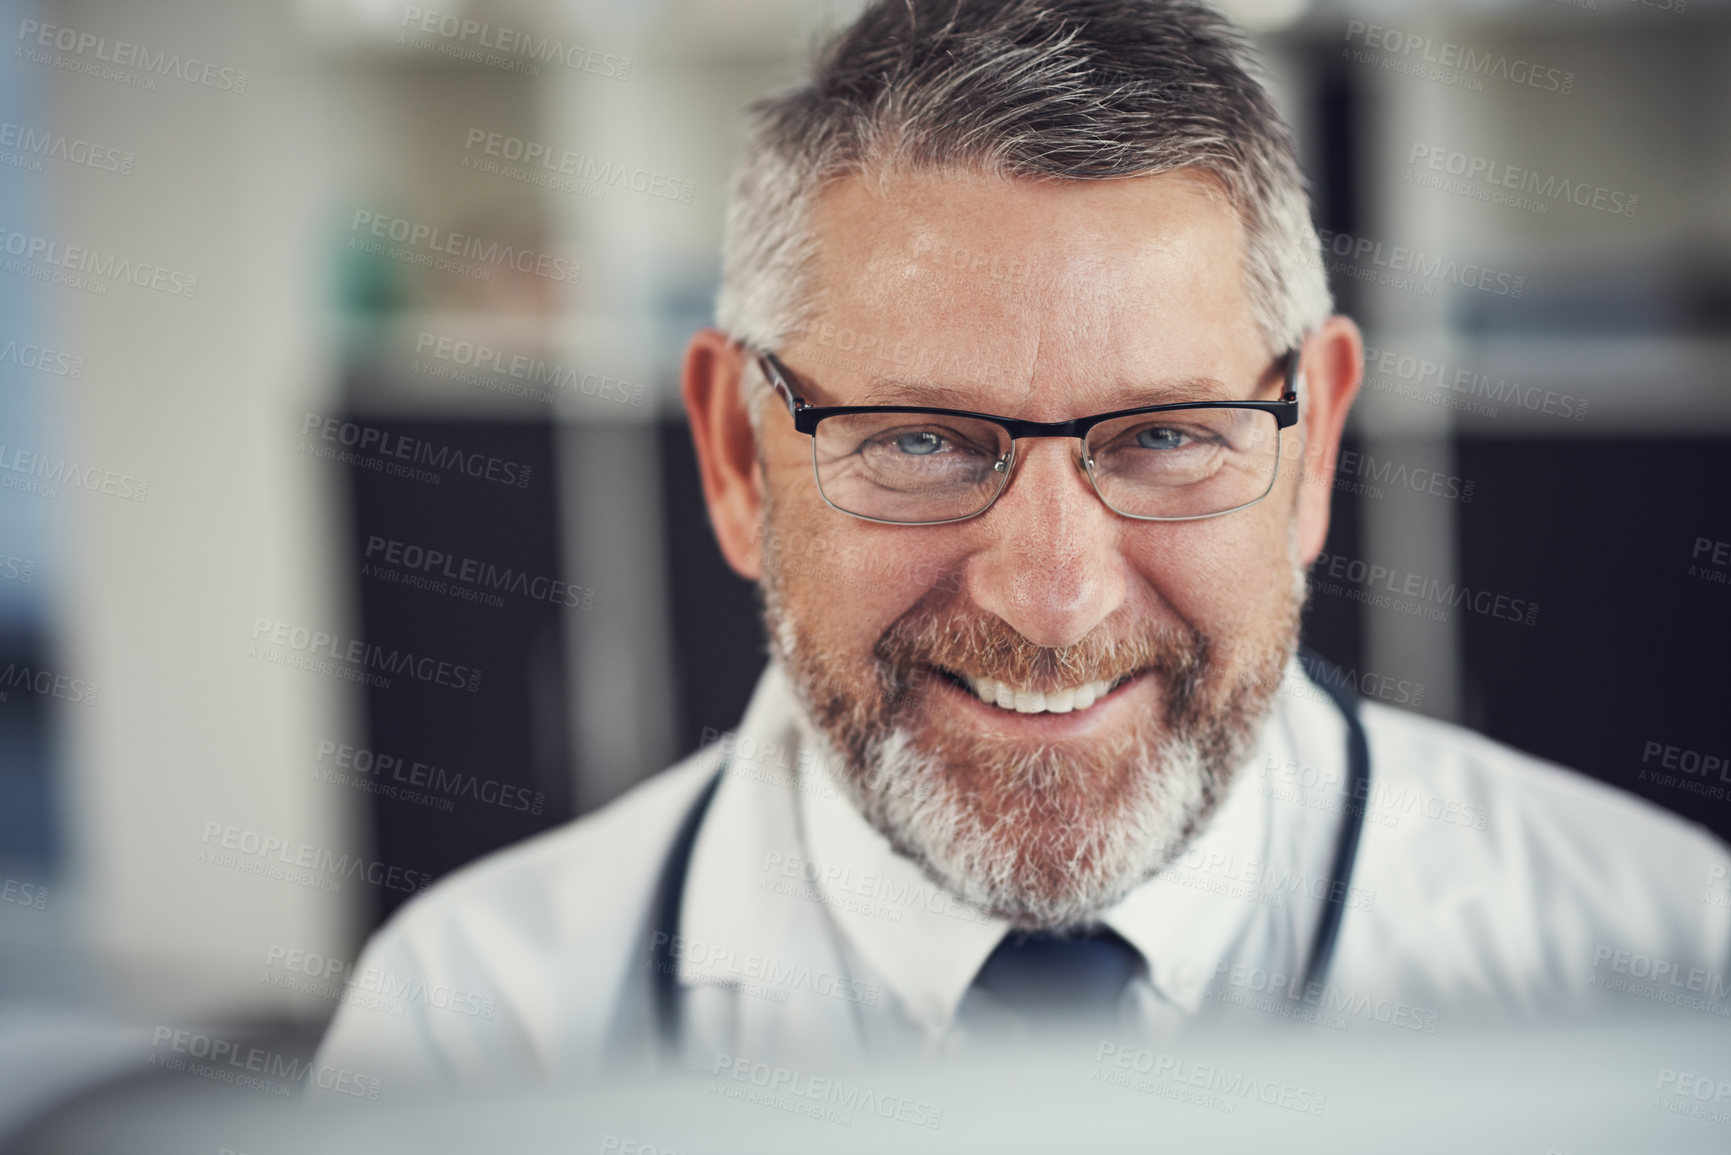 Buy stock photo Portrait of a mature doctor using a computer at a desk in his office